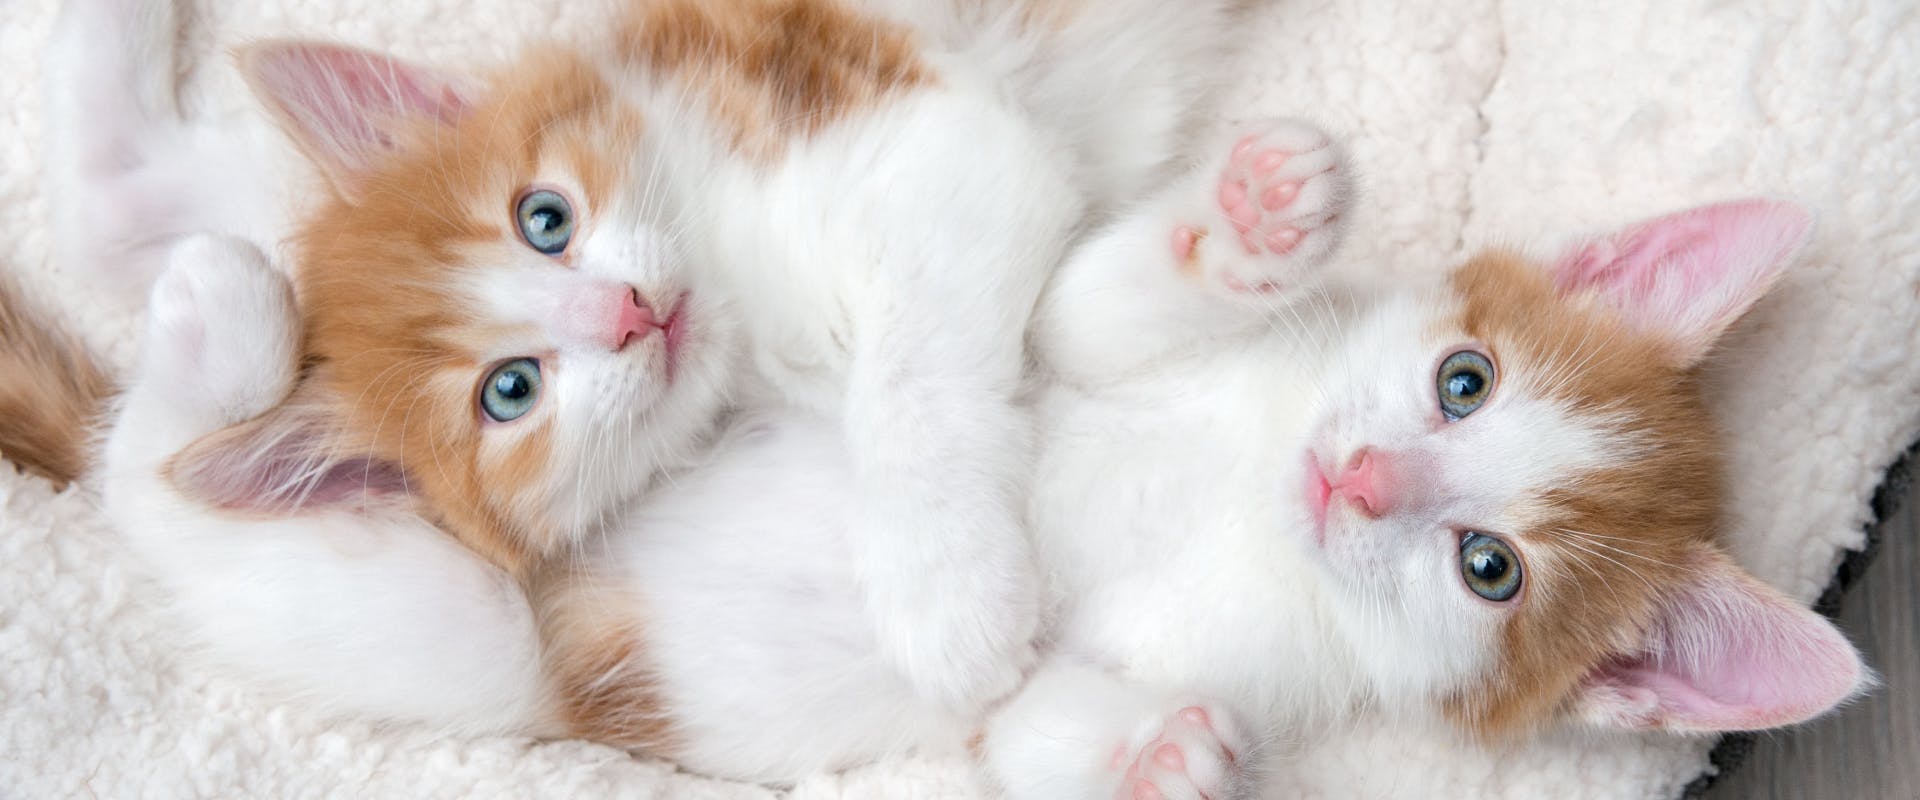 two white and ginger kittens lying on their back on a fluffy white blanket